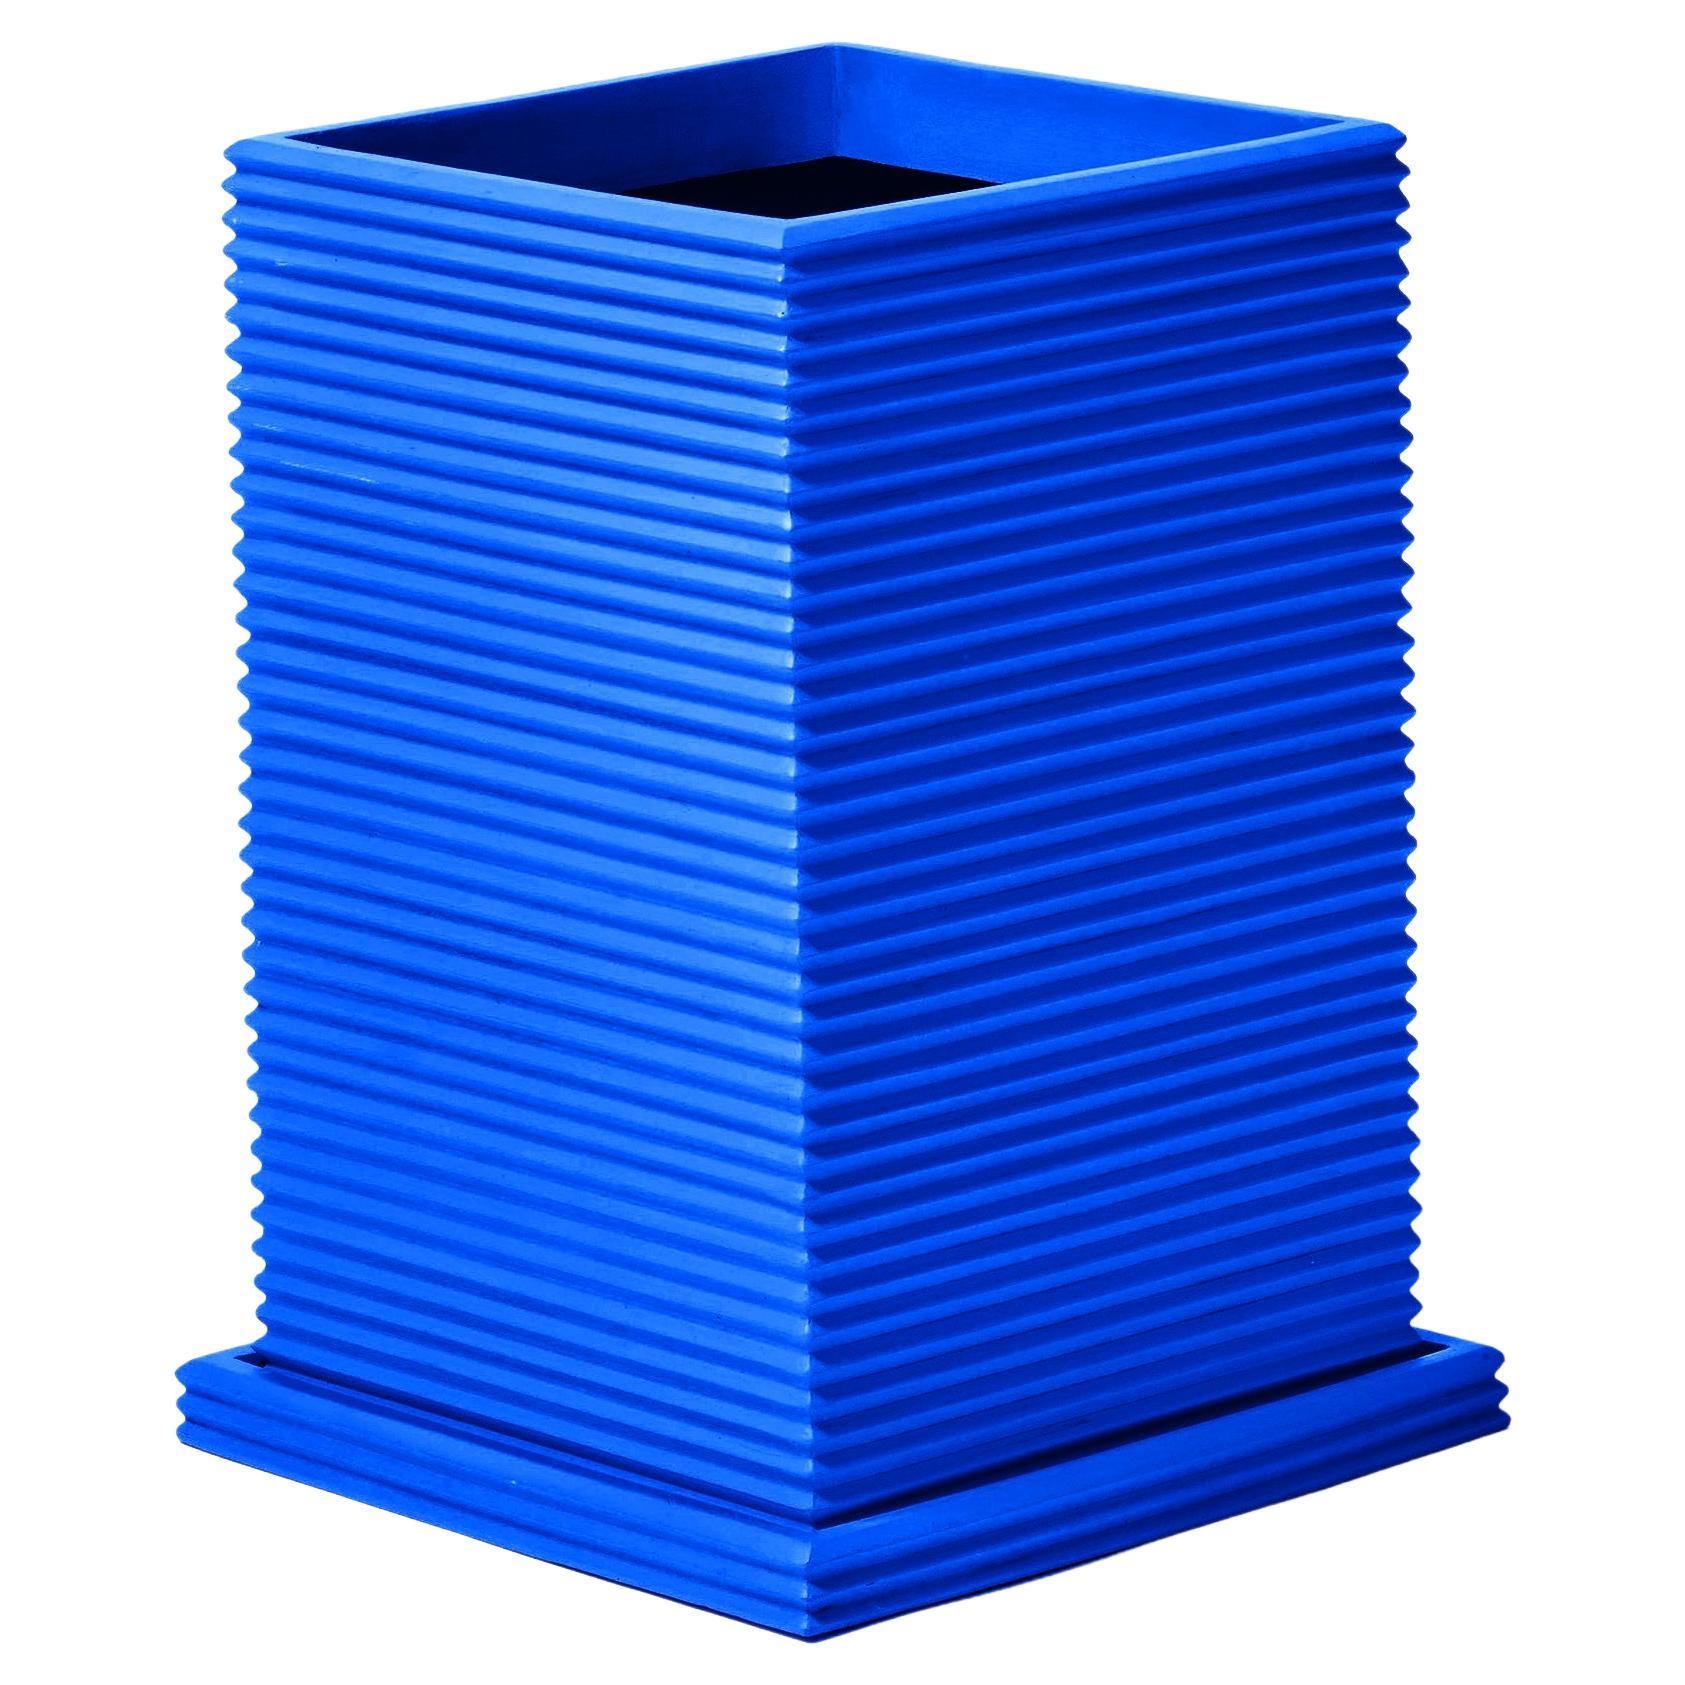 Standard Tall Rectangular Planter 'Blue' by TFM, Represented by Tuleste Factory